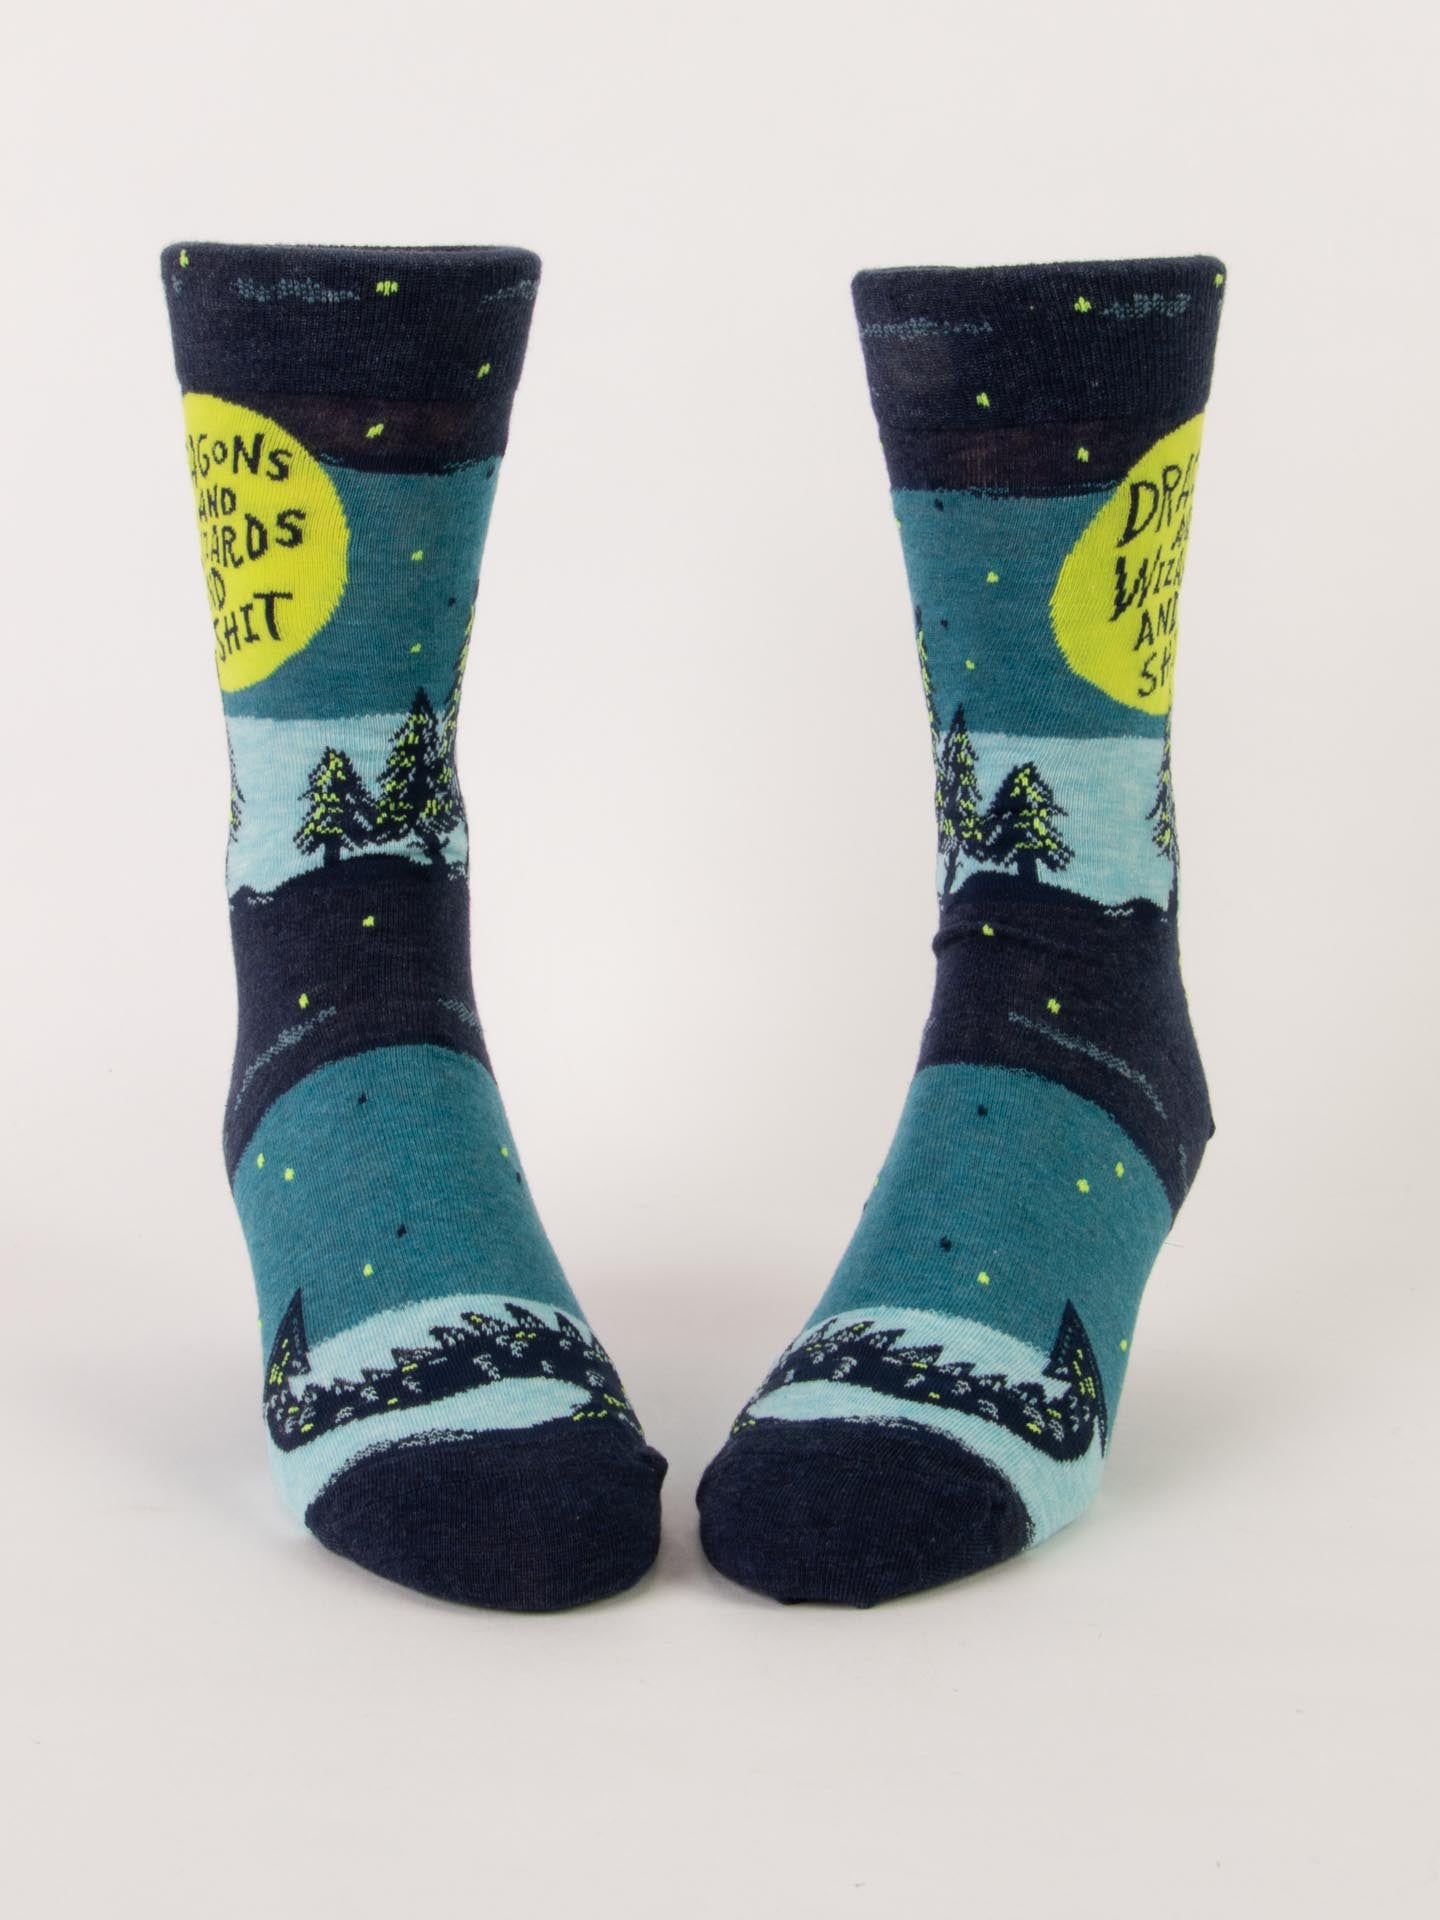 Blue Q - Dragons and Wizards Mens Socks